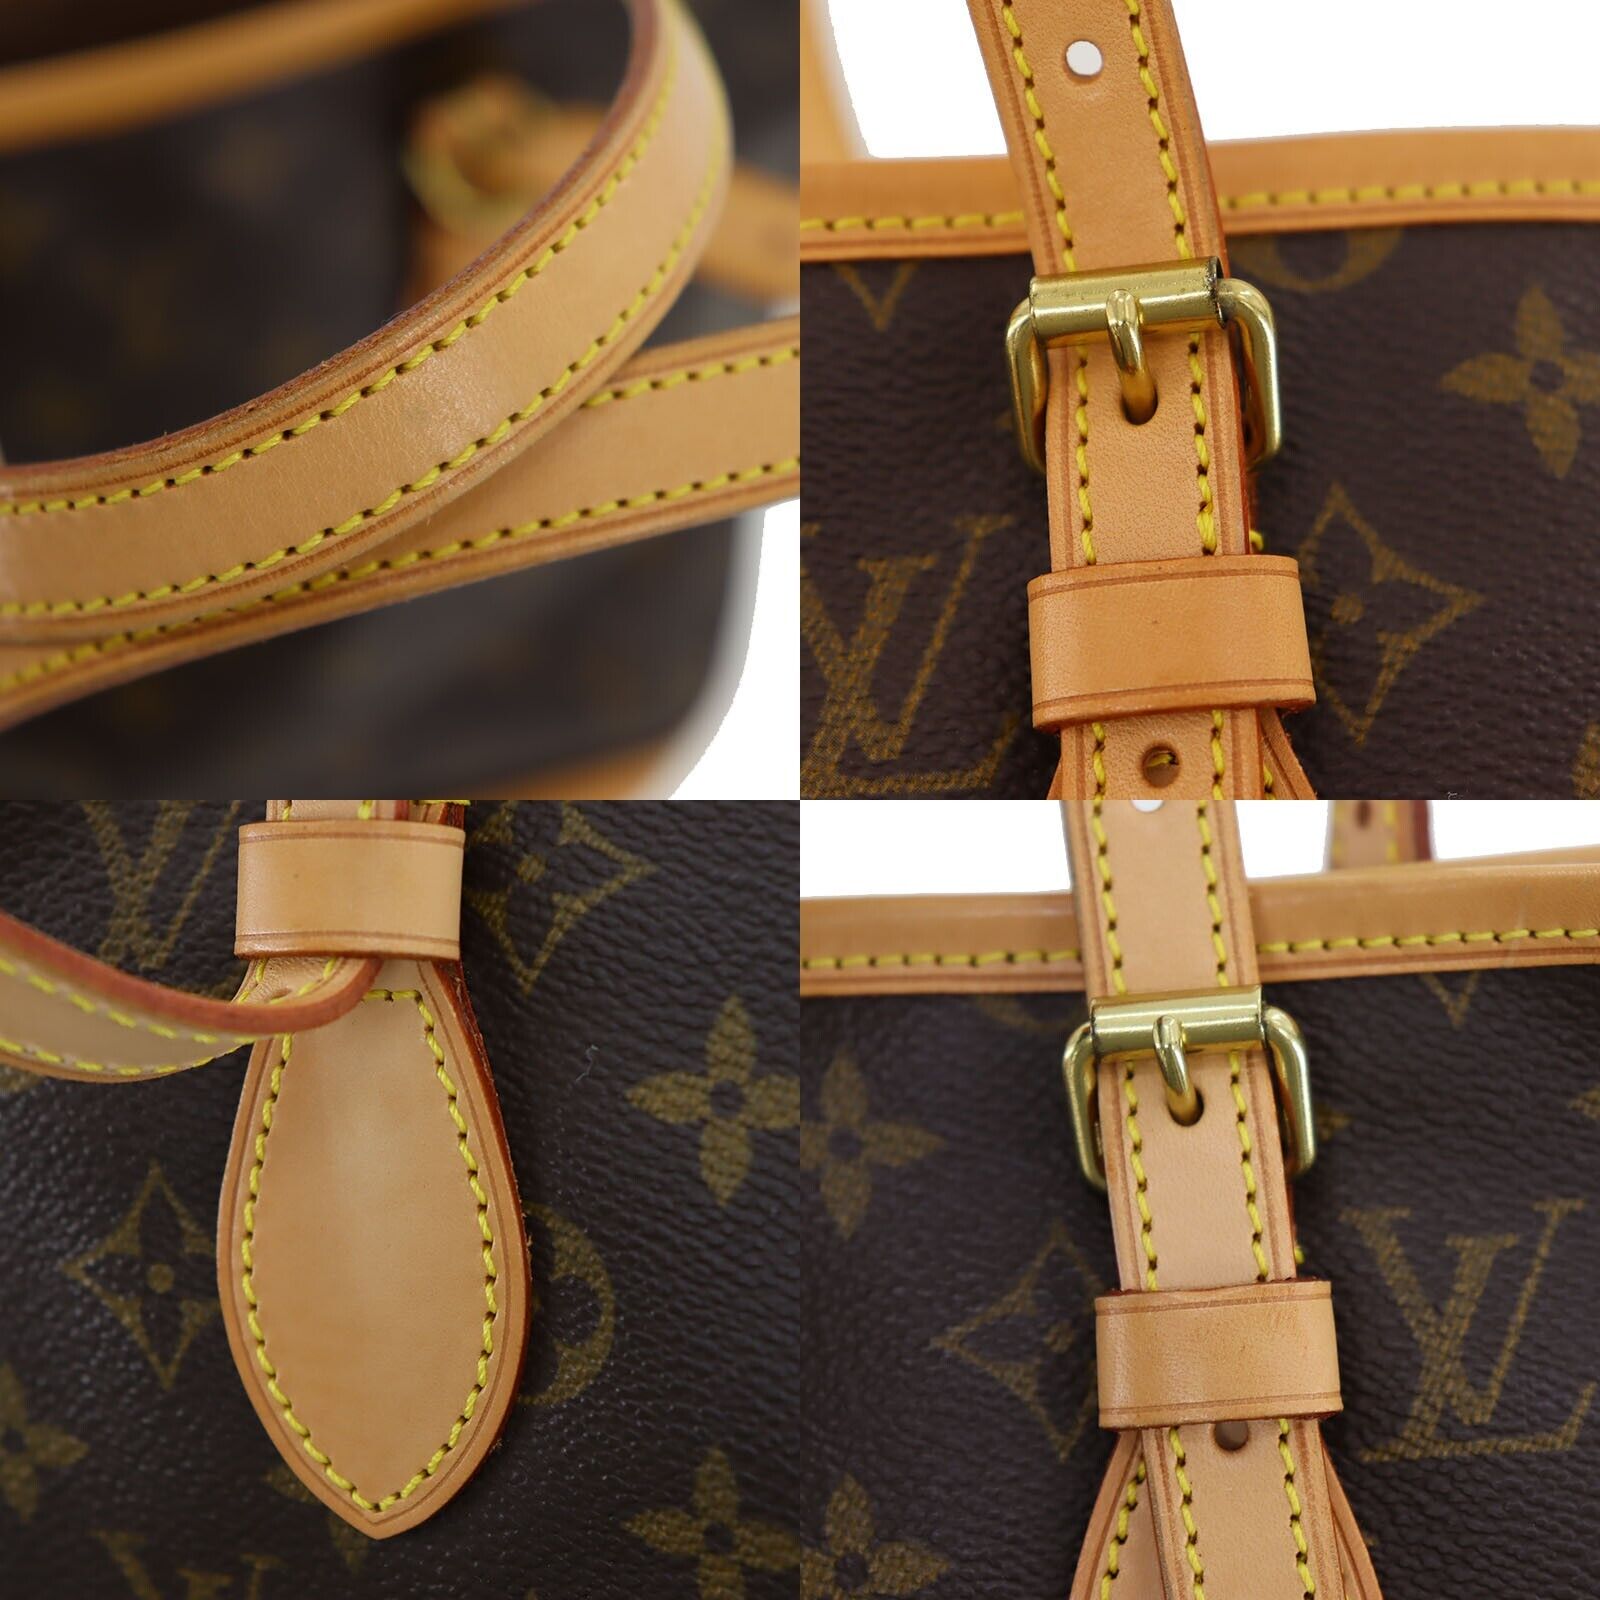 LOUIS VUITTON Bucket PM Used Shoulder Tote Bag M42238 France